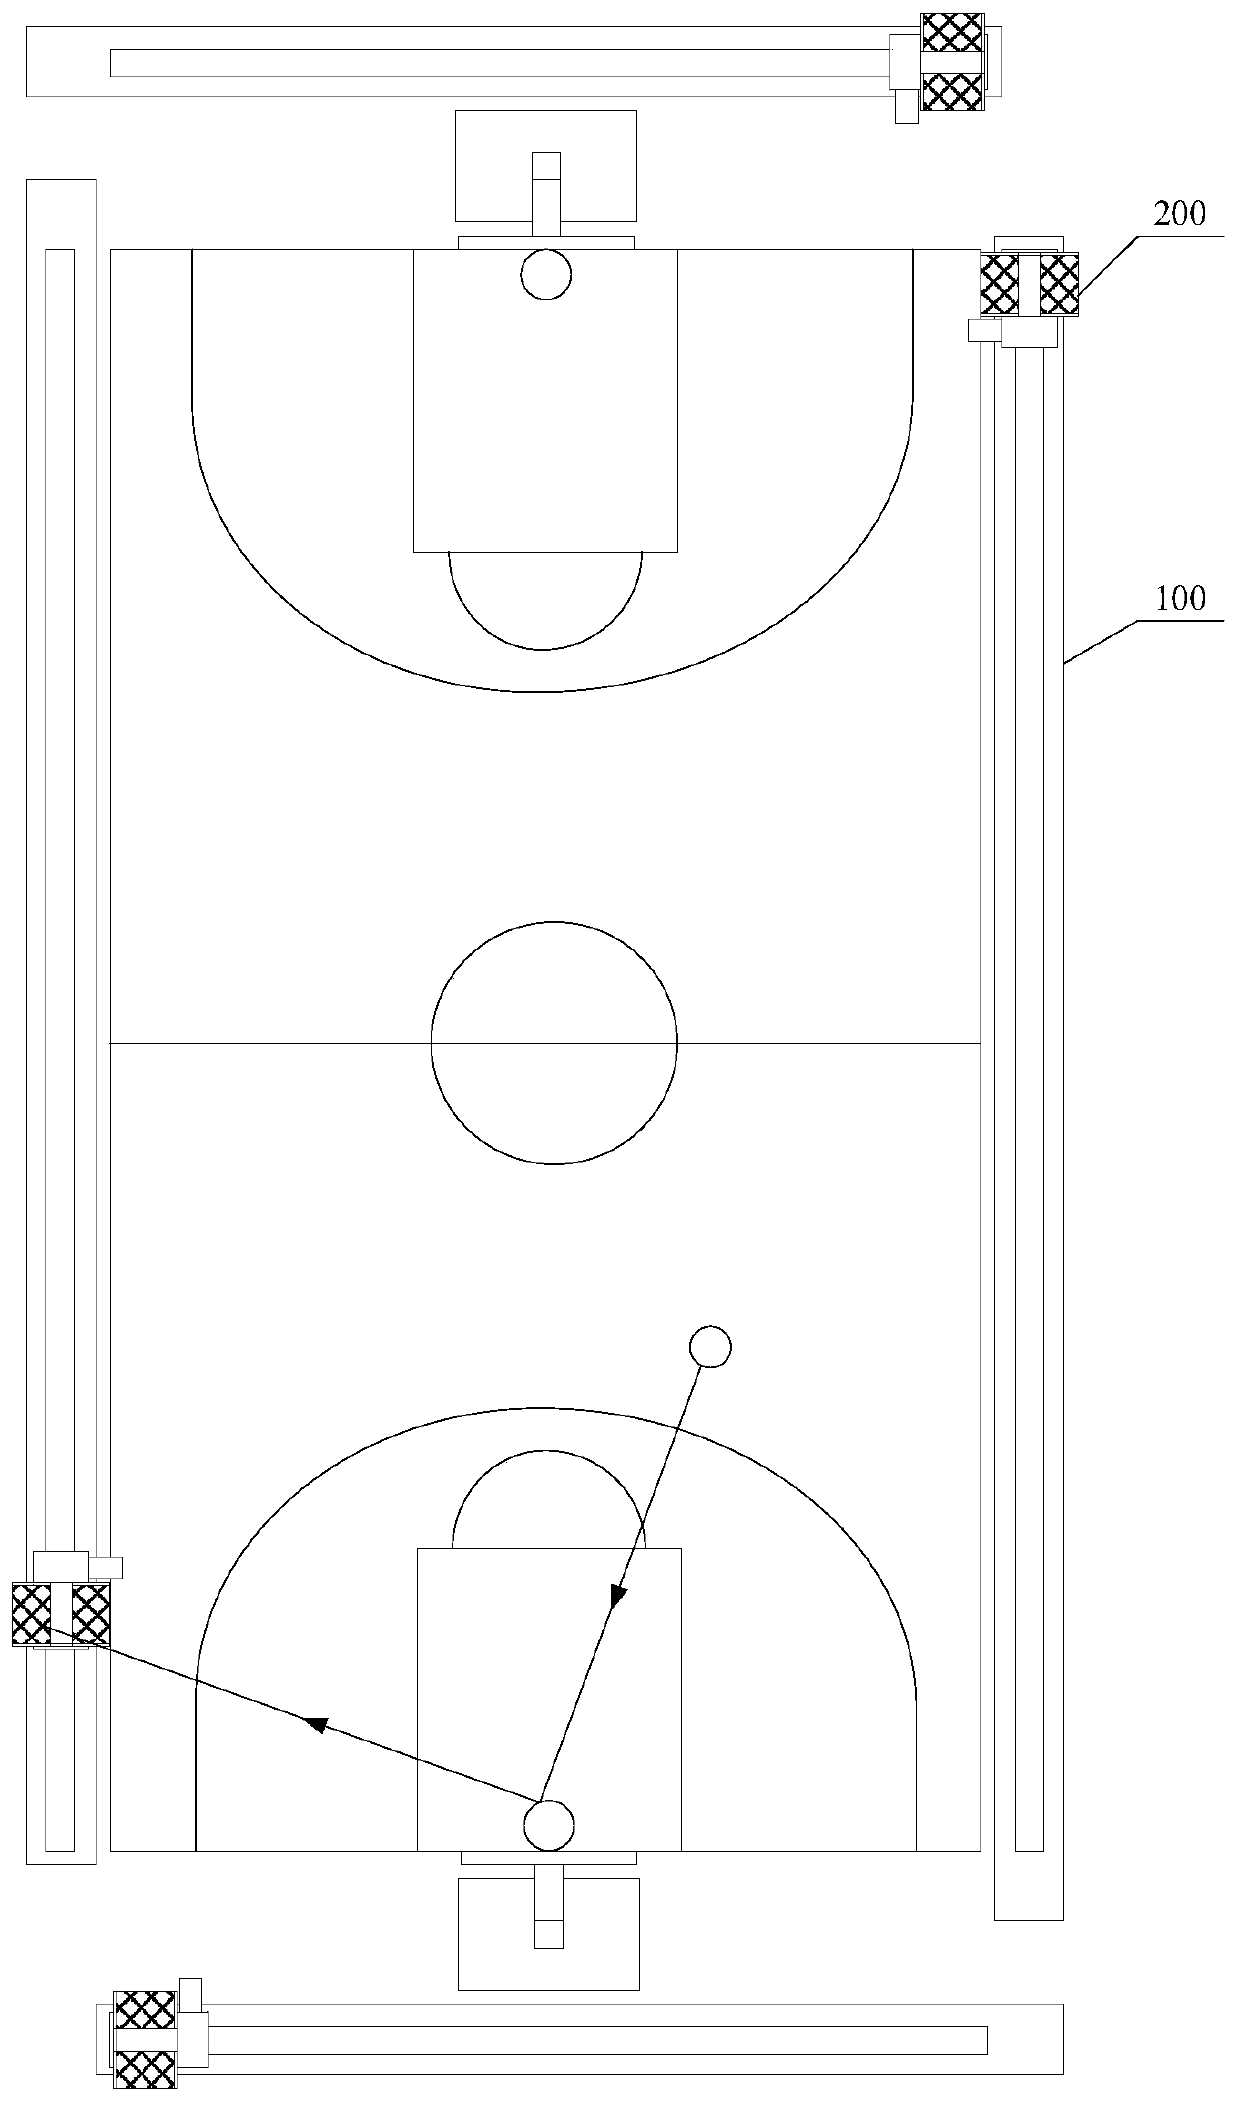 Auxiliary device used for basket shooting training